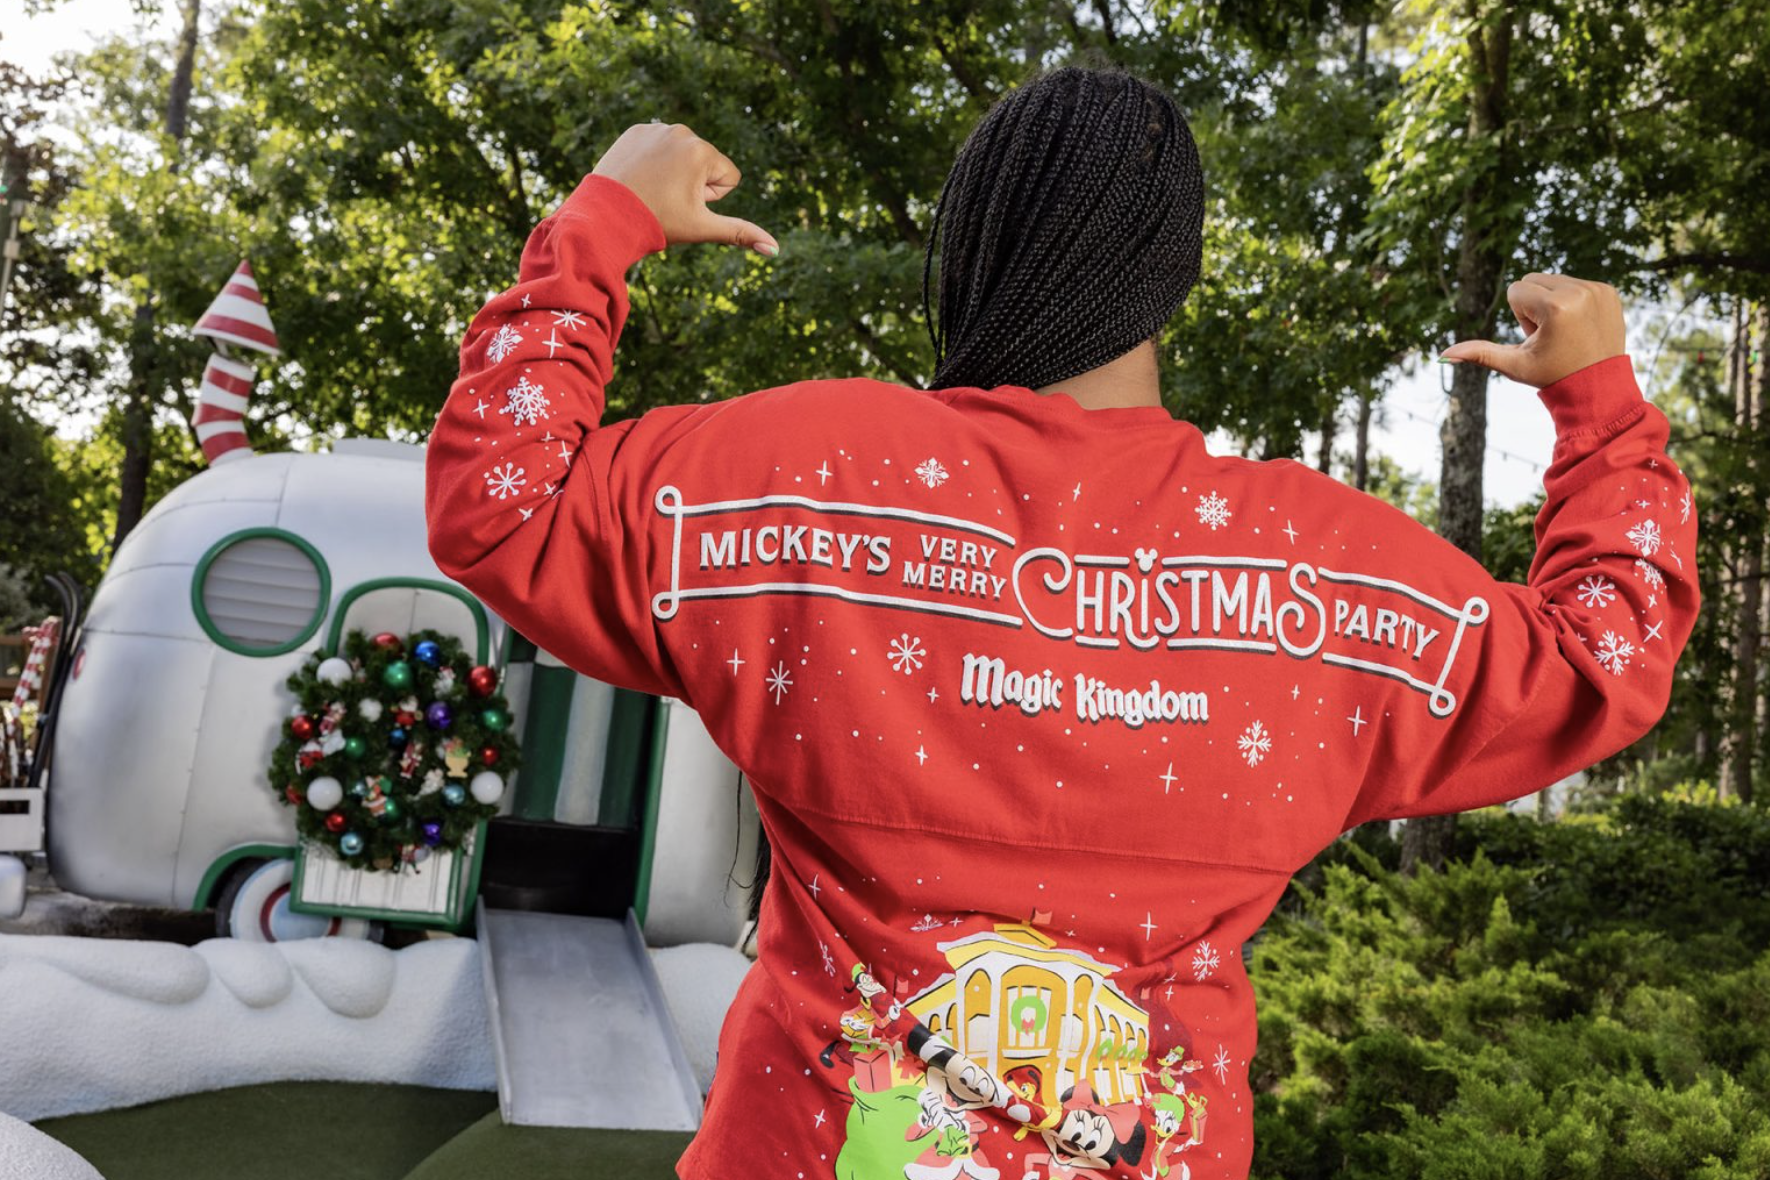 mickey's very merry christmas party merchandise